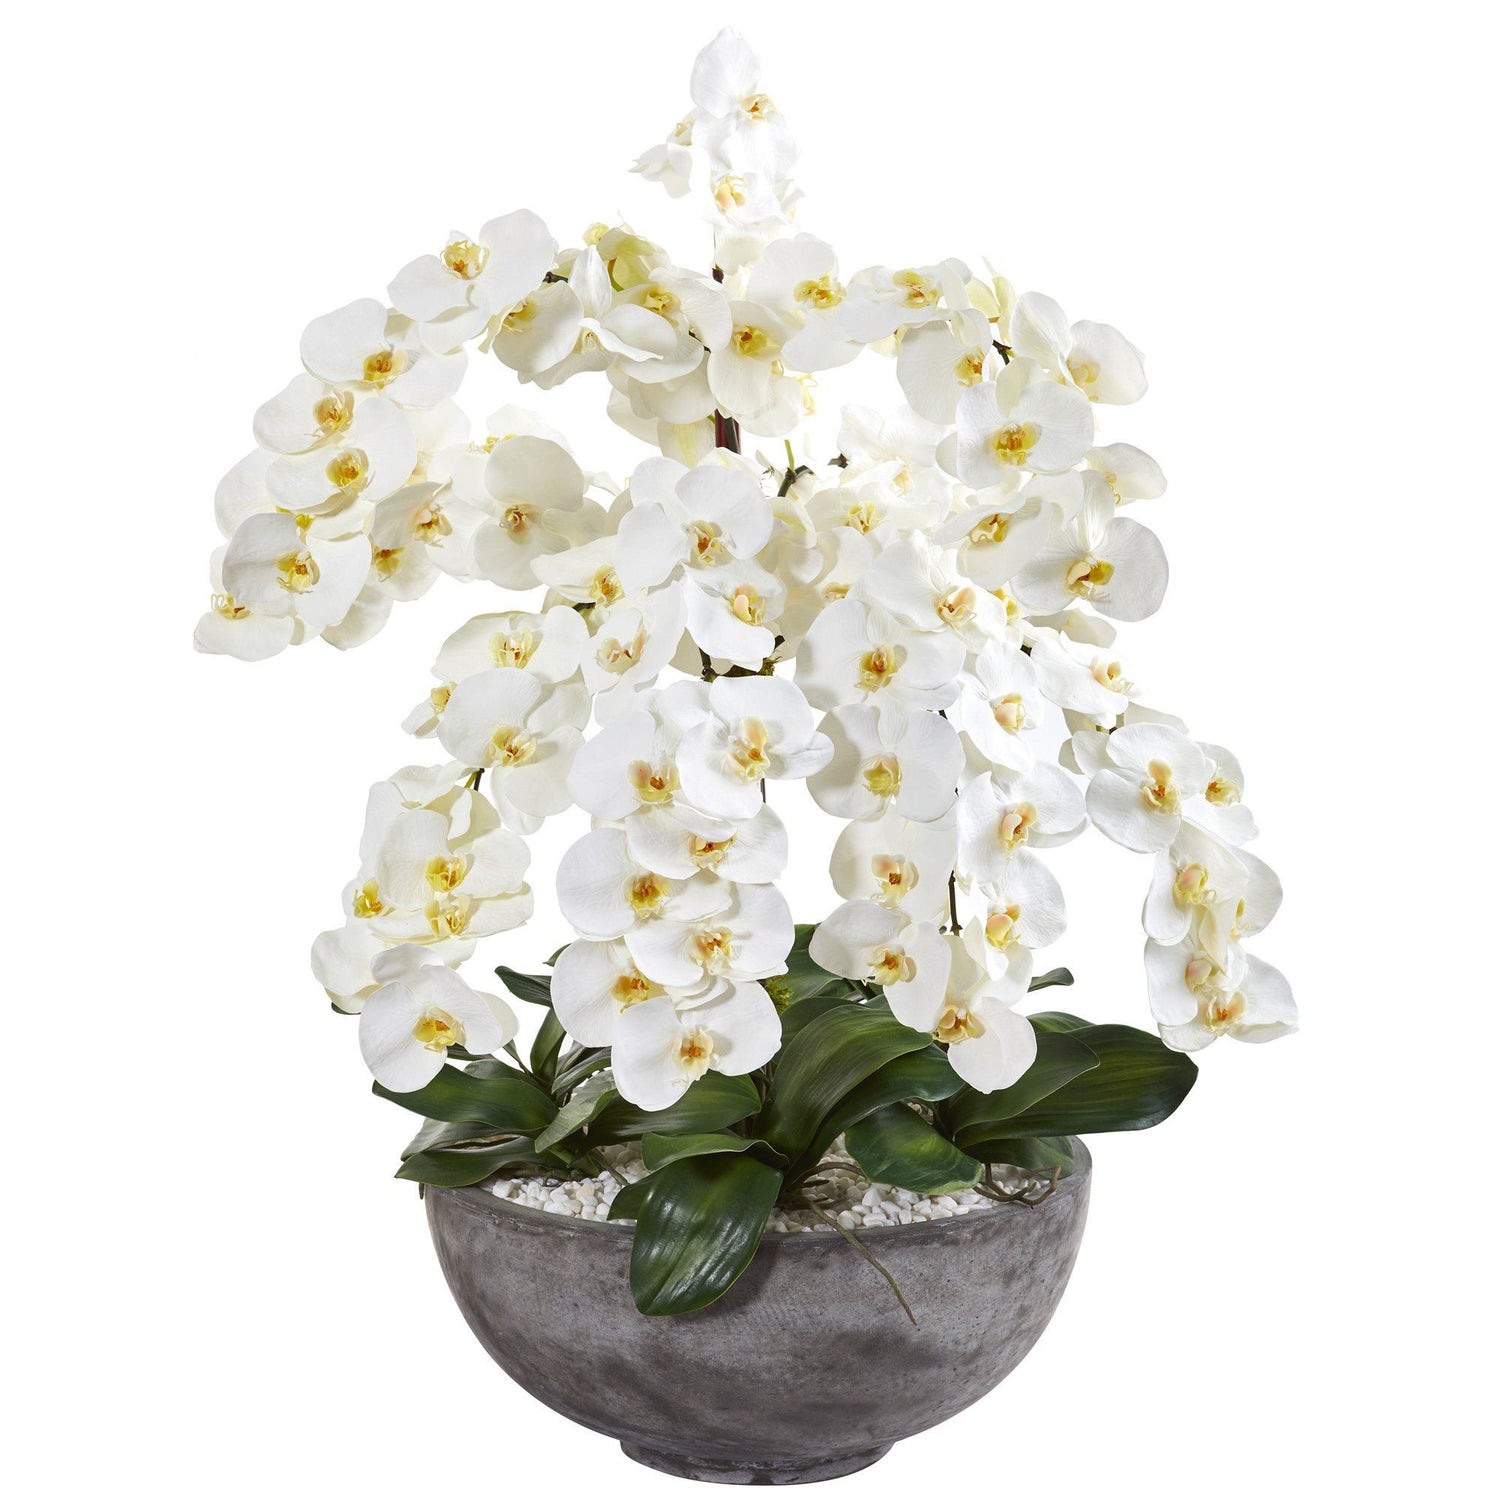 39” Phalaenopsis Orchid Artificial Arrangement in Large Cement Bowl